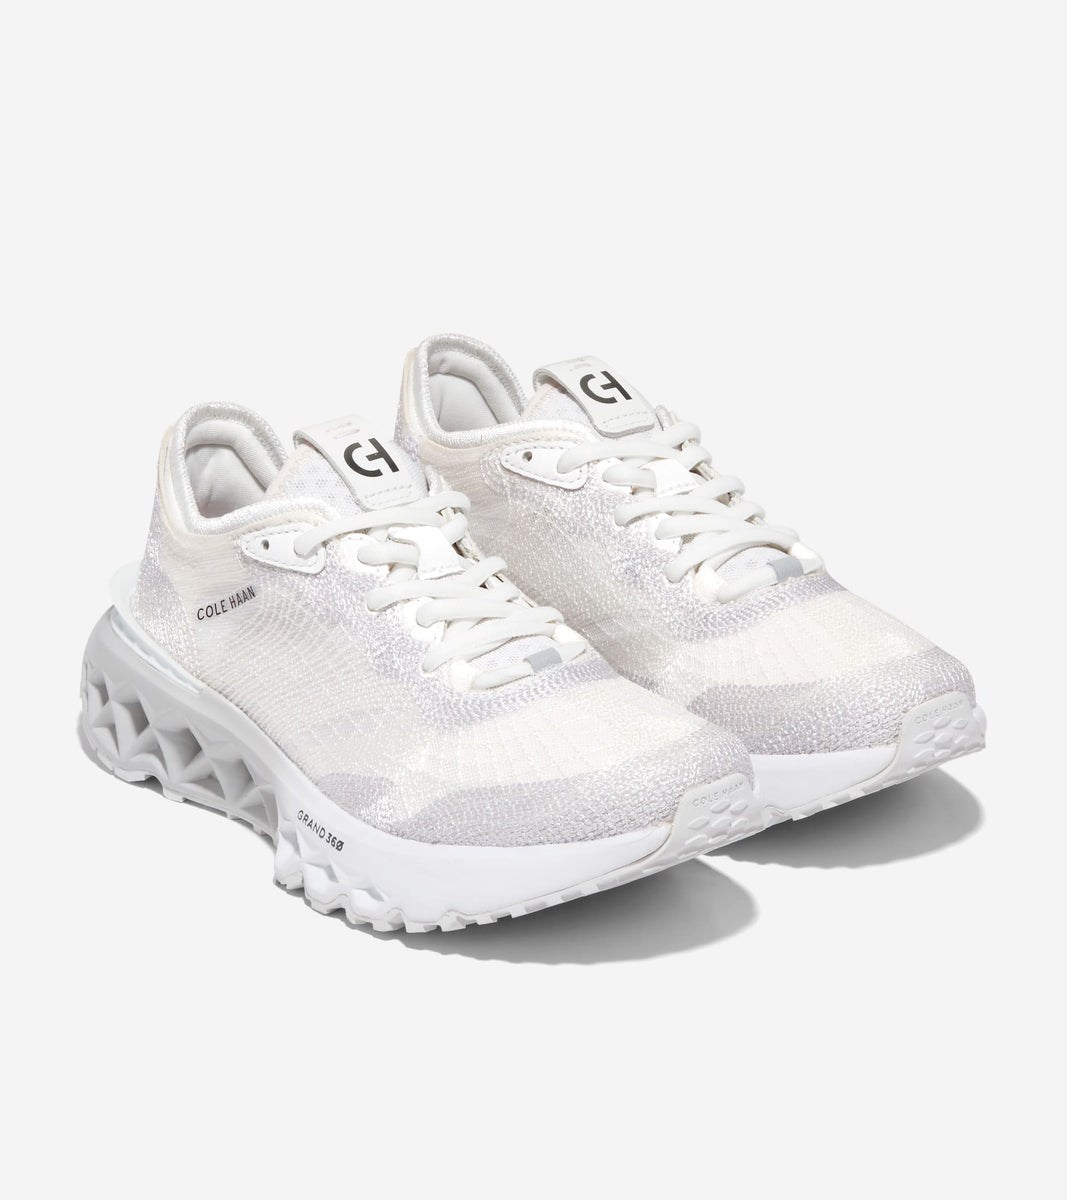 W28361:OPTIC WHITE/MICRO CHIP Tenis 5.ZERØGRAND Embrostitch Running Shoe Mujer | Cole Haan Colombia